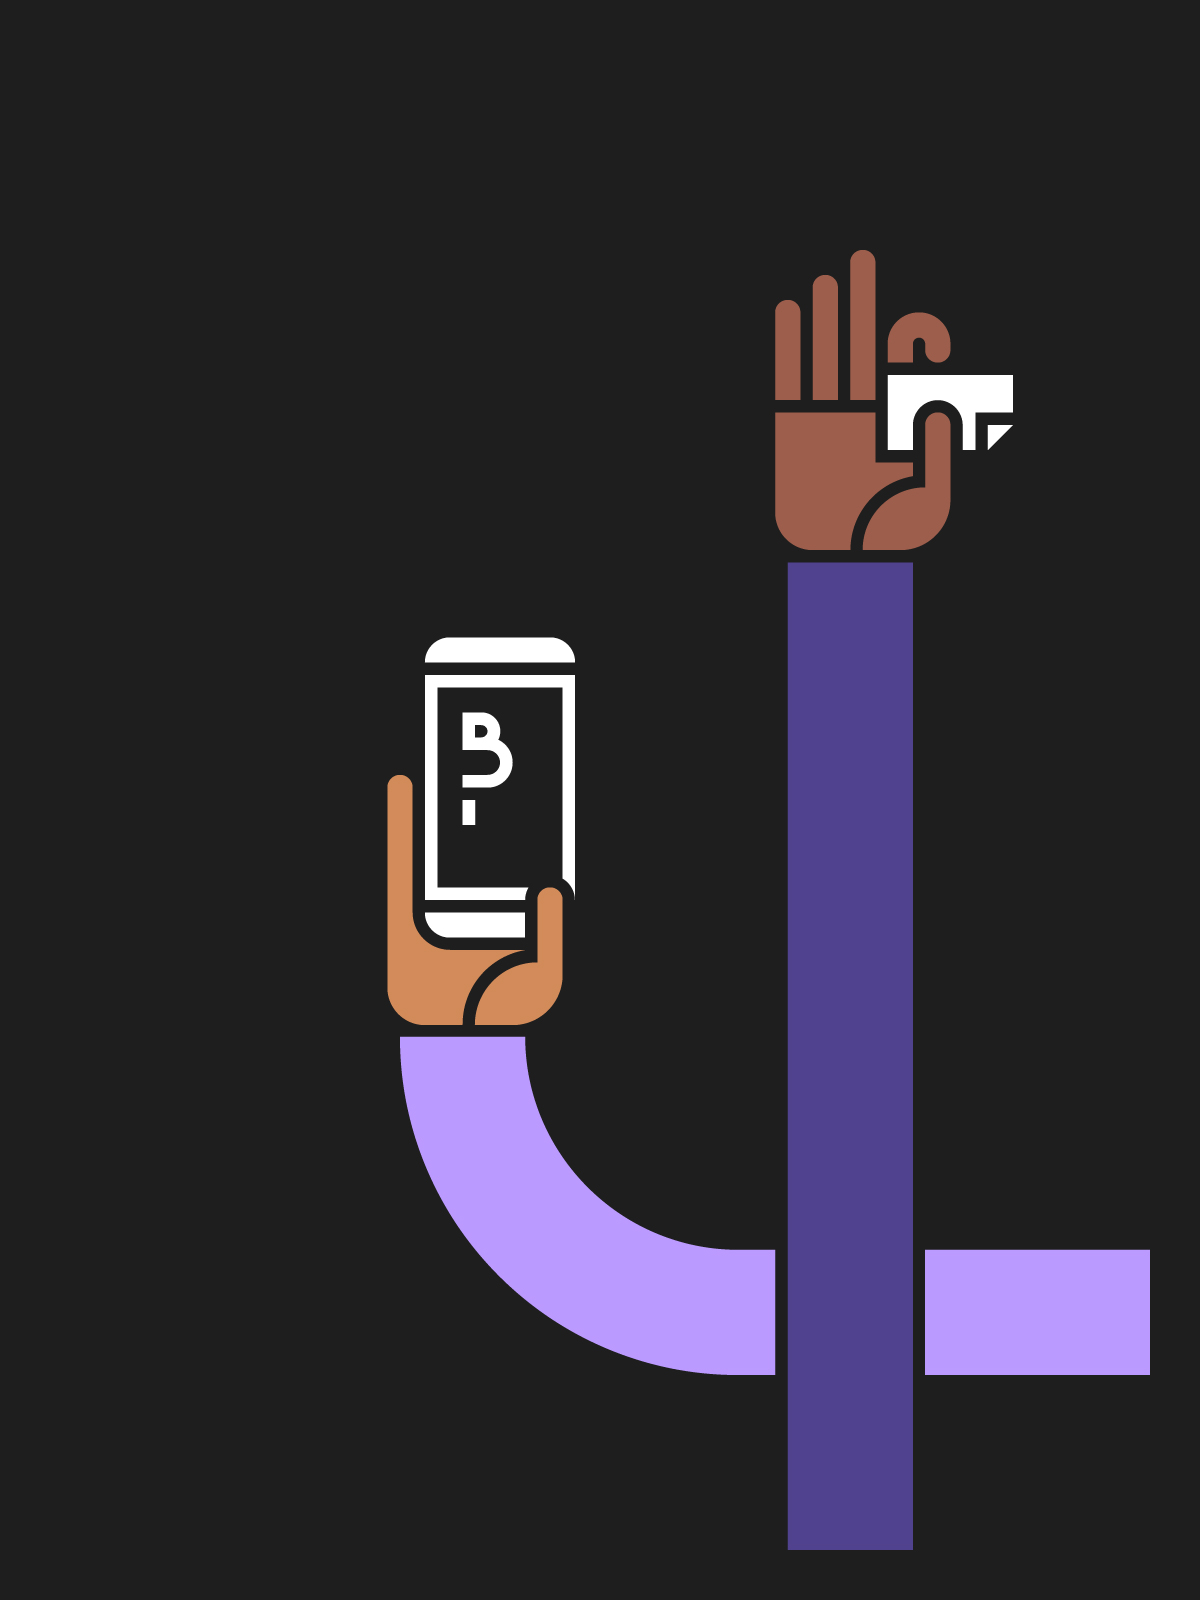 Illustration depicting two stylised hands holding a business card and a mobile phone with a logo on it.